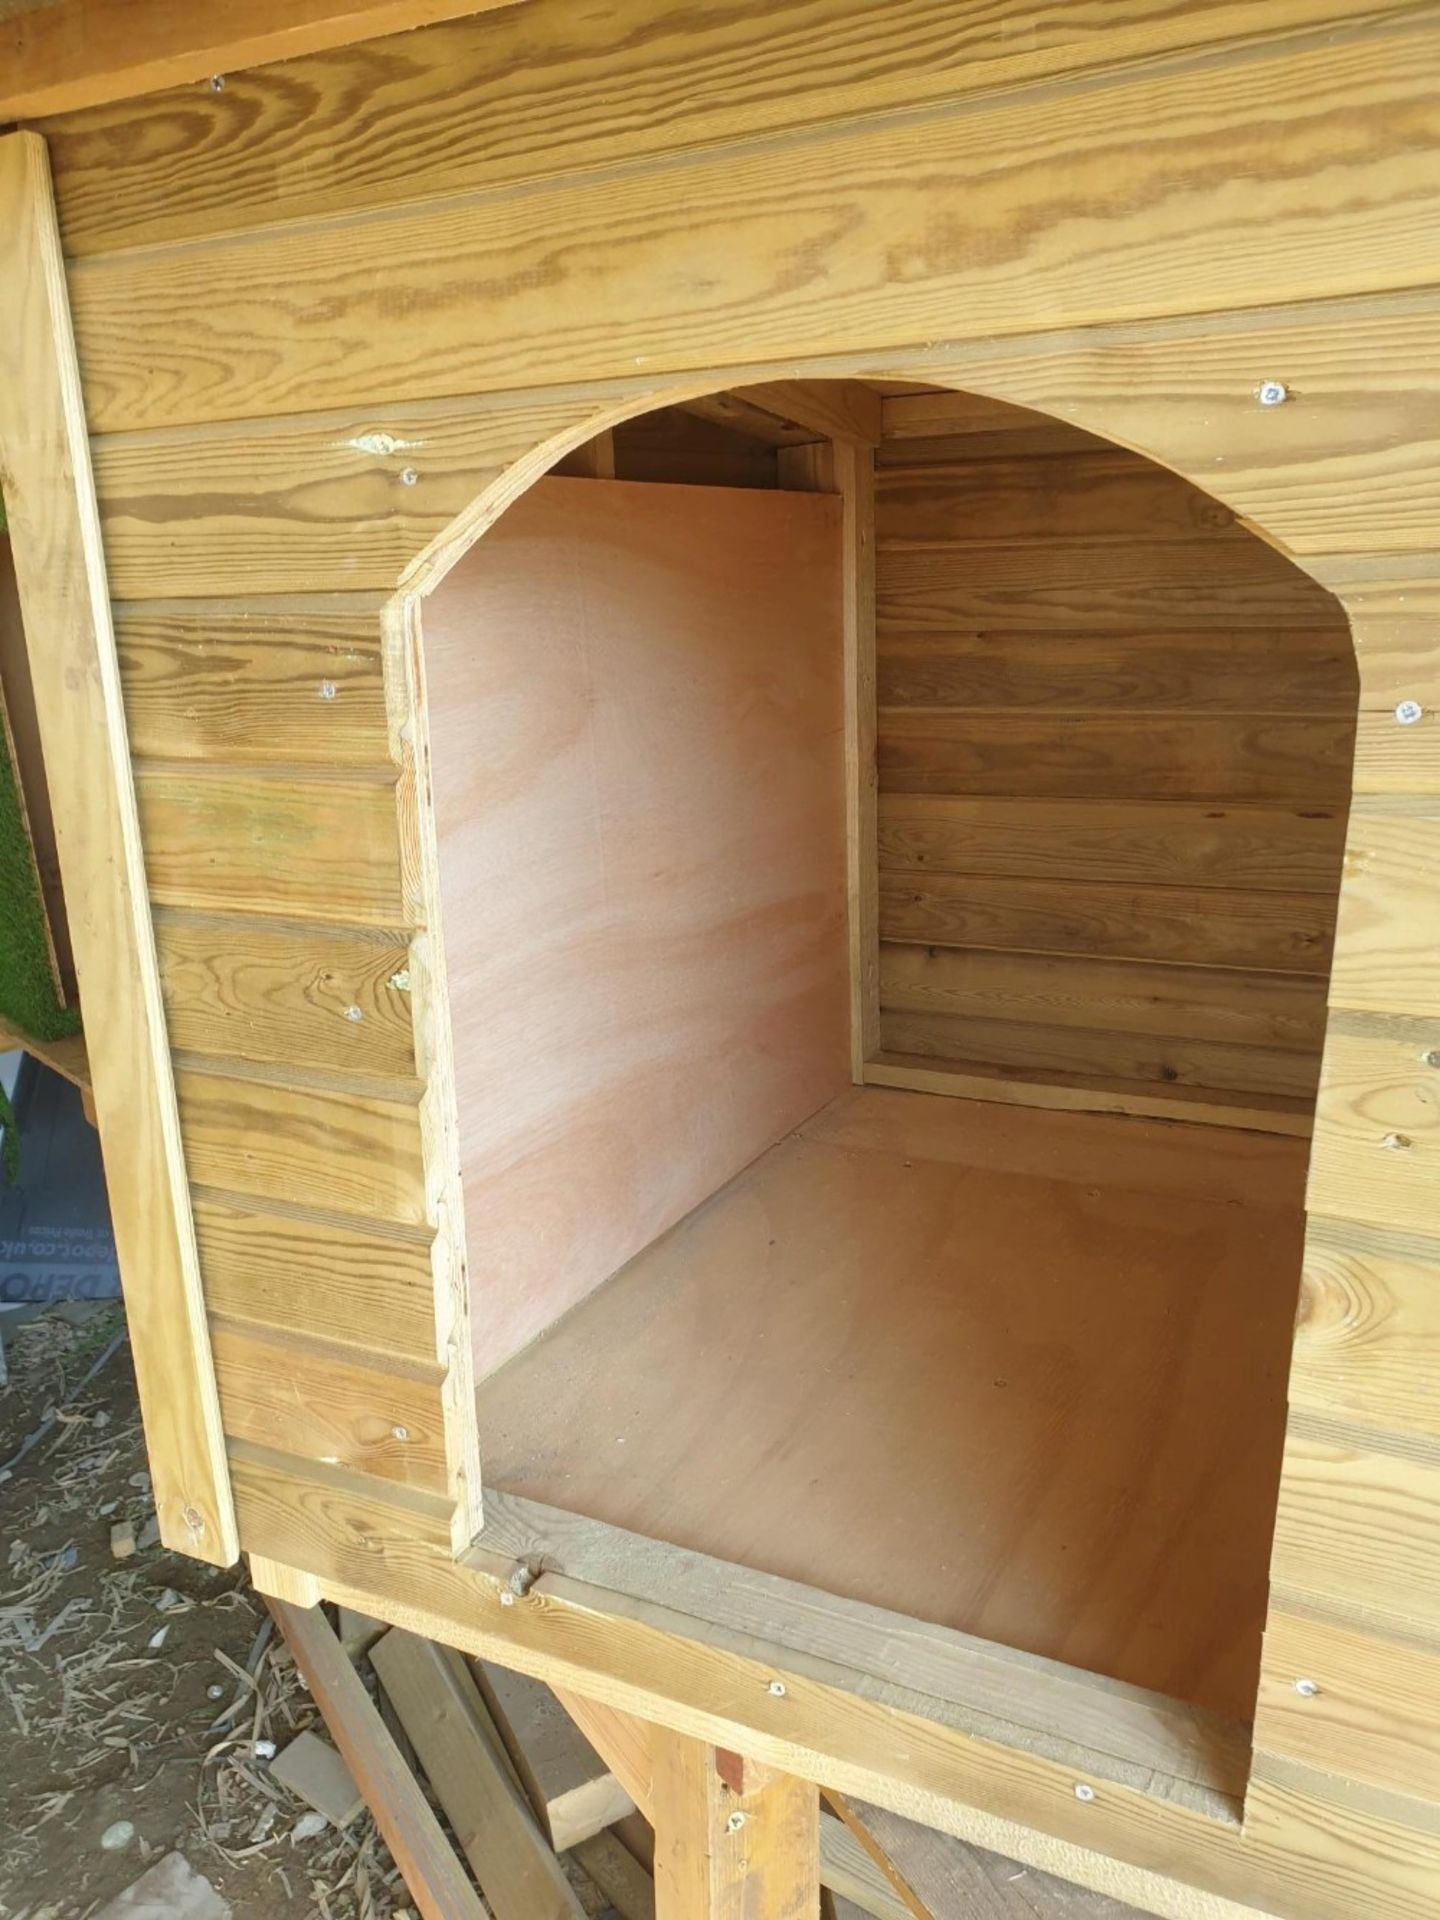 SECTIONAL WOODEN DOG KENNEL.35" LENGTH X 35.5" WIDE X 35" HEIGHT APPROX - Image 6 of 6